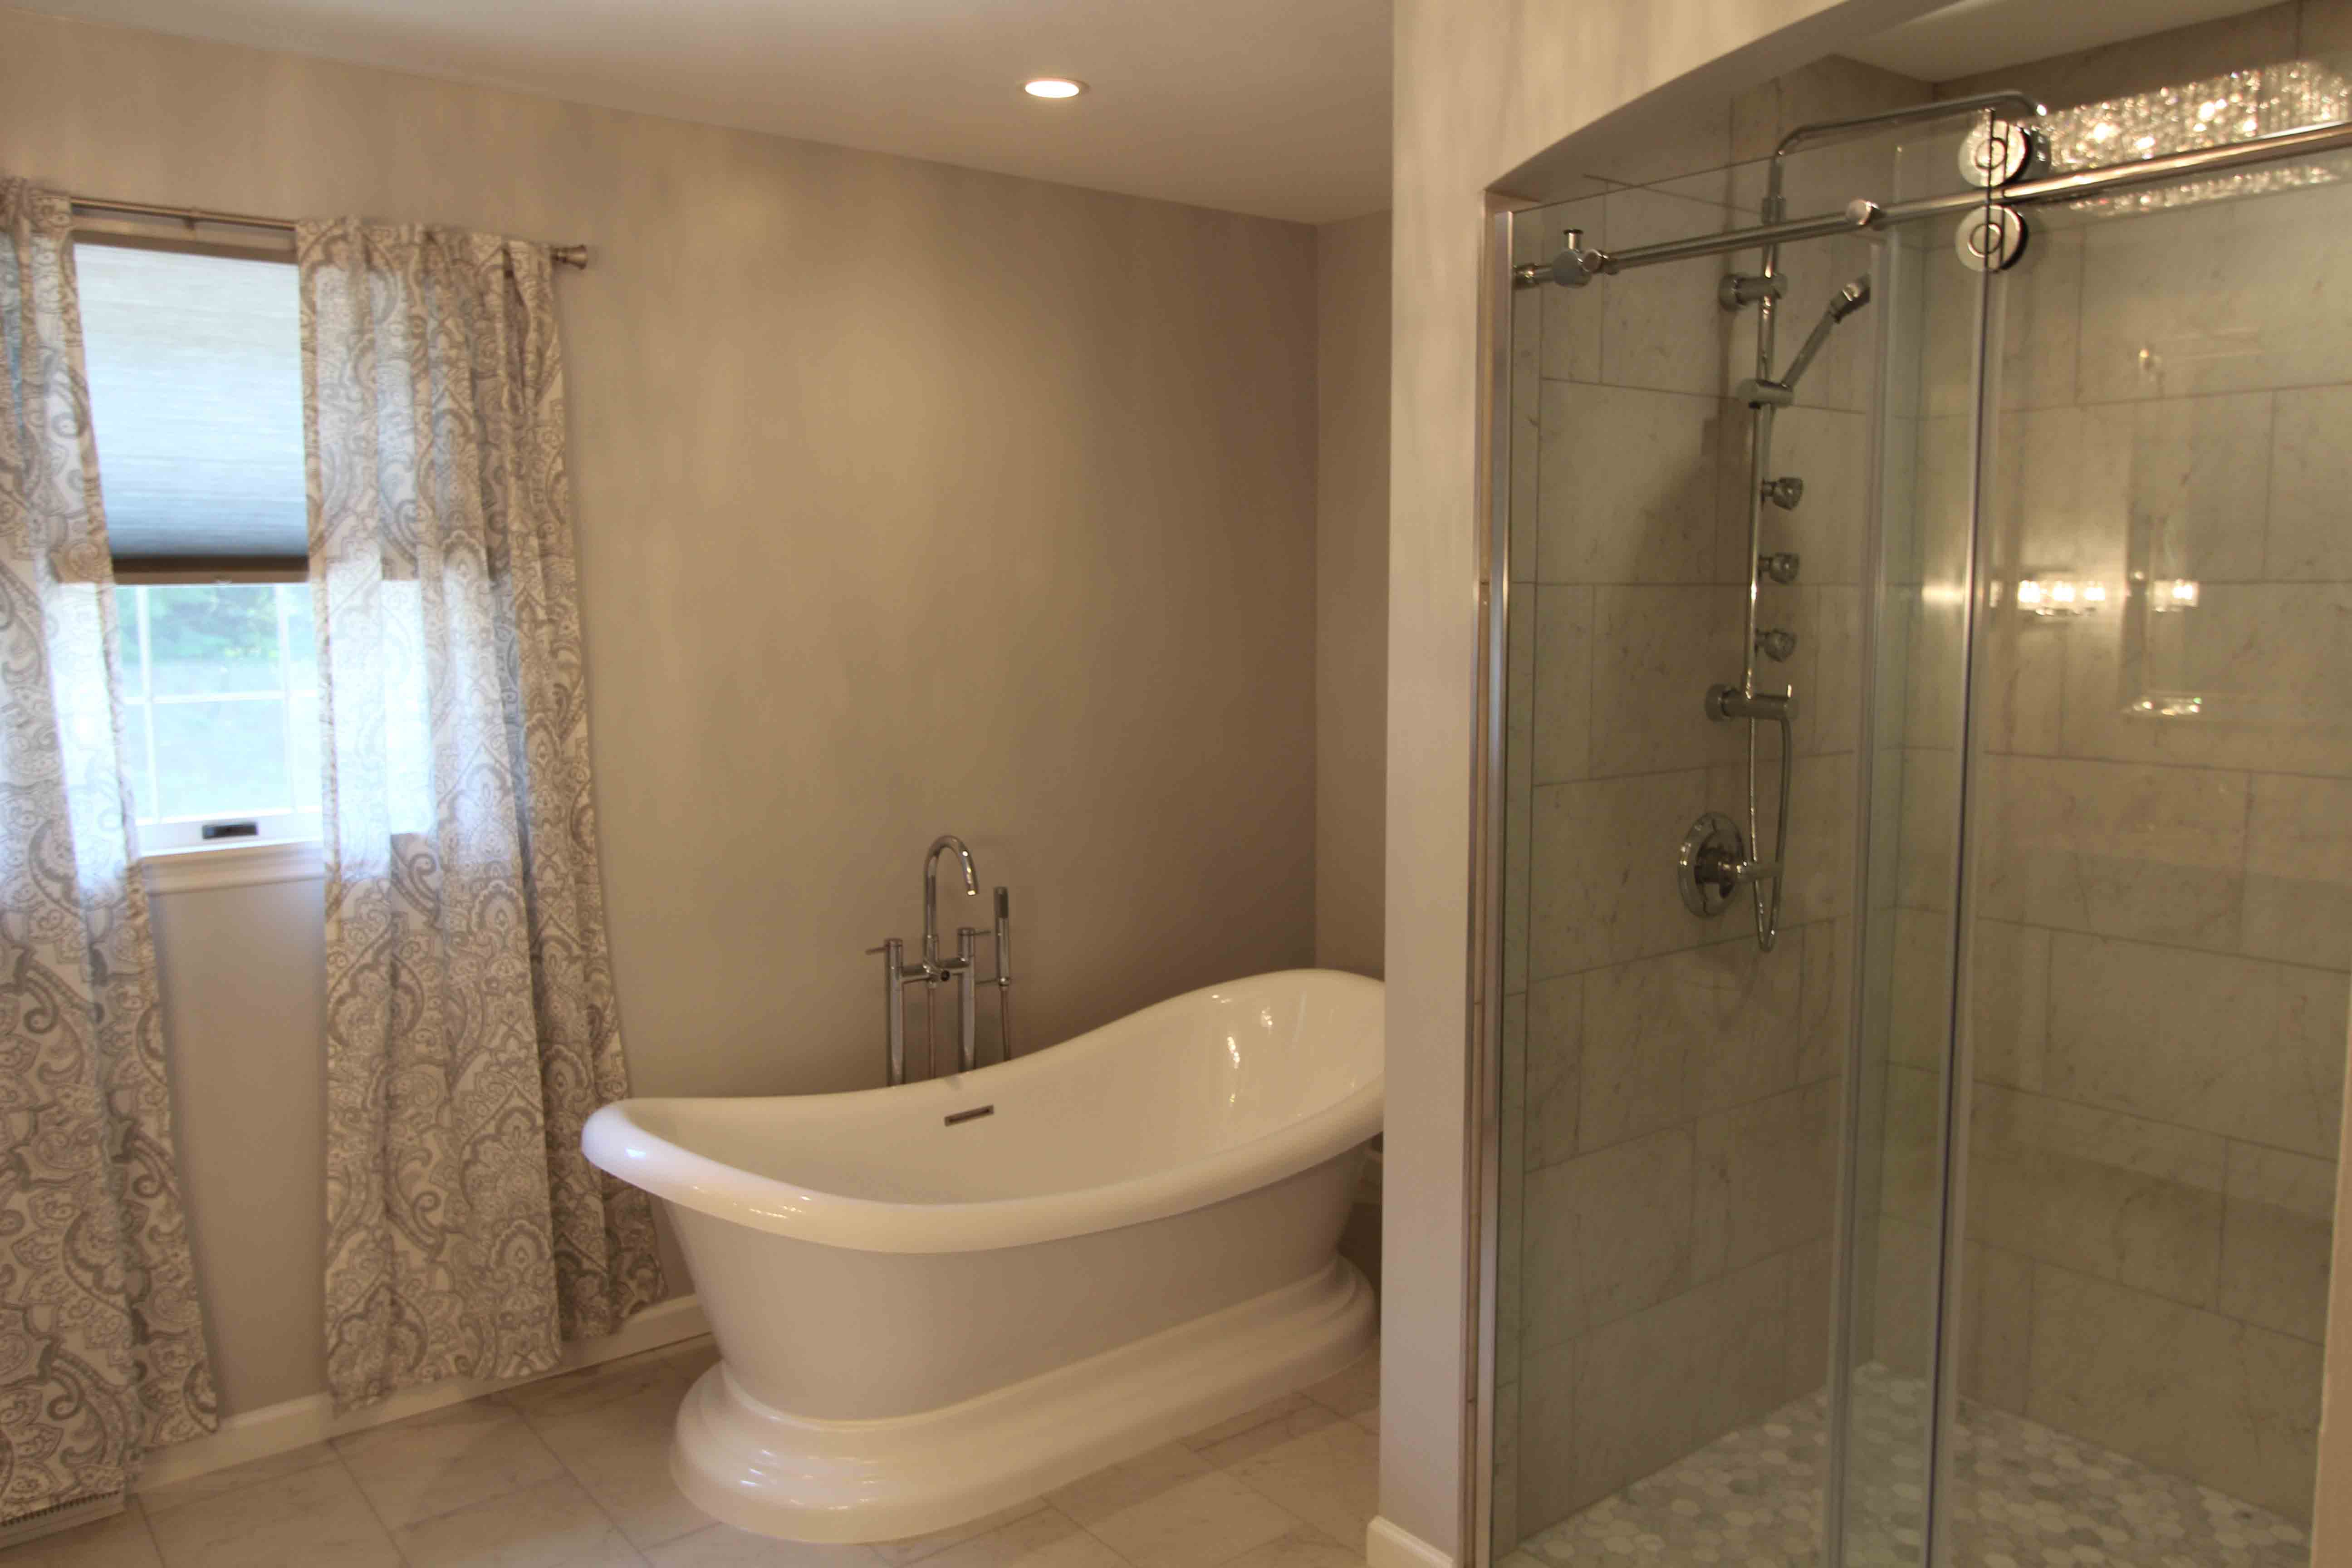 Bathroom Remodel - Wyomissing, PA » Bodden Construction Group